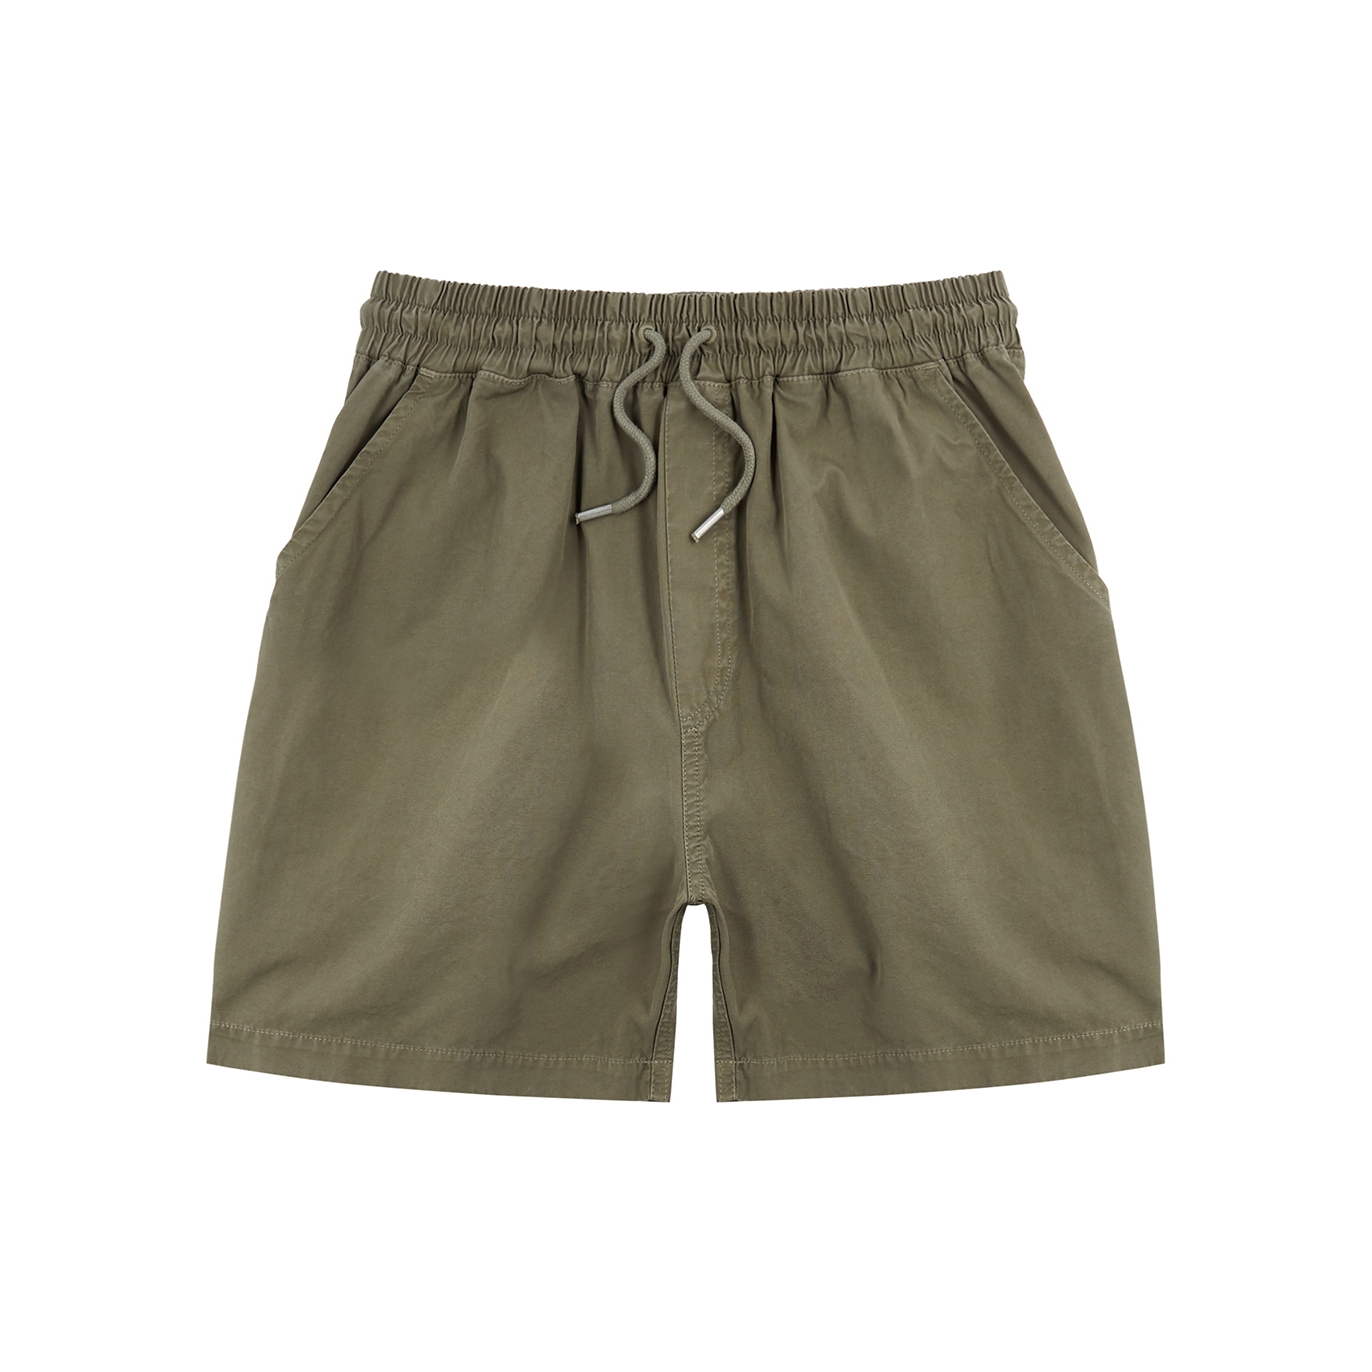 Colorful Standard Army Green Cotton Shorts